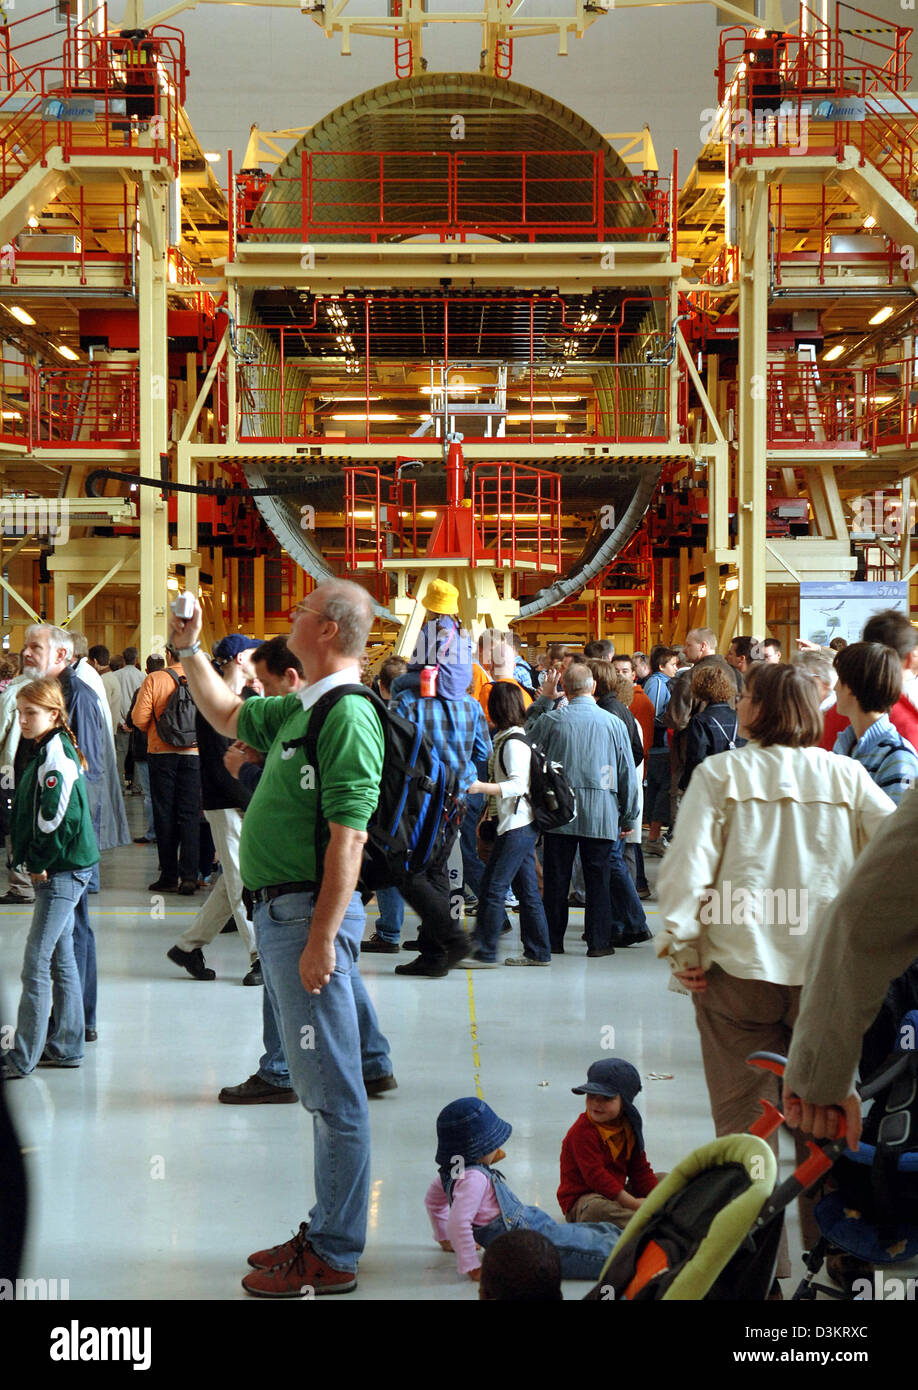 dpa) - Spectators visit the Airbus A380 construction hall during the 'Airbus  family day' in Hamburg, Germany, Saturday 27 August 2005. Organisers expect  over 100,000 visitors for the event taking place on